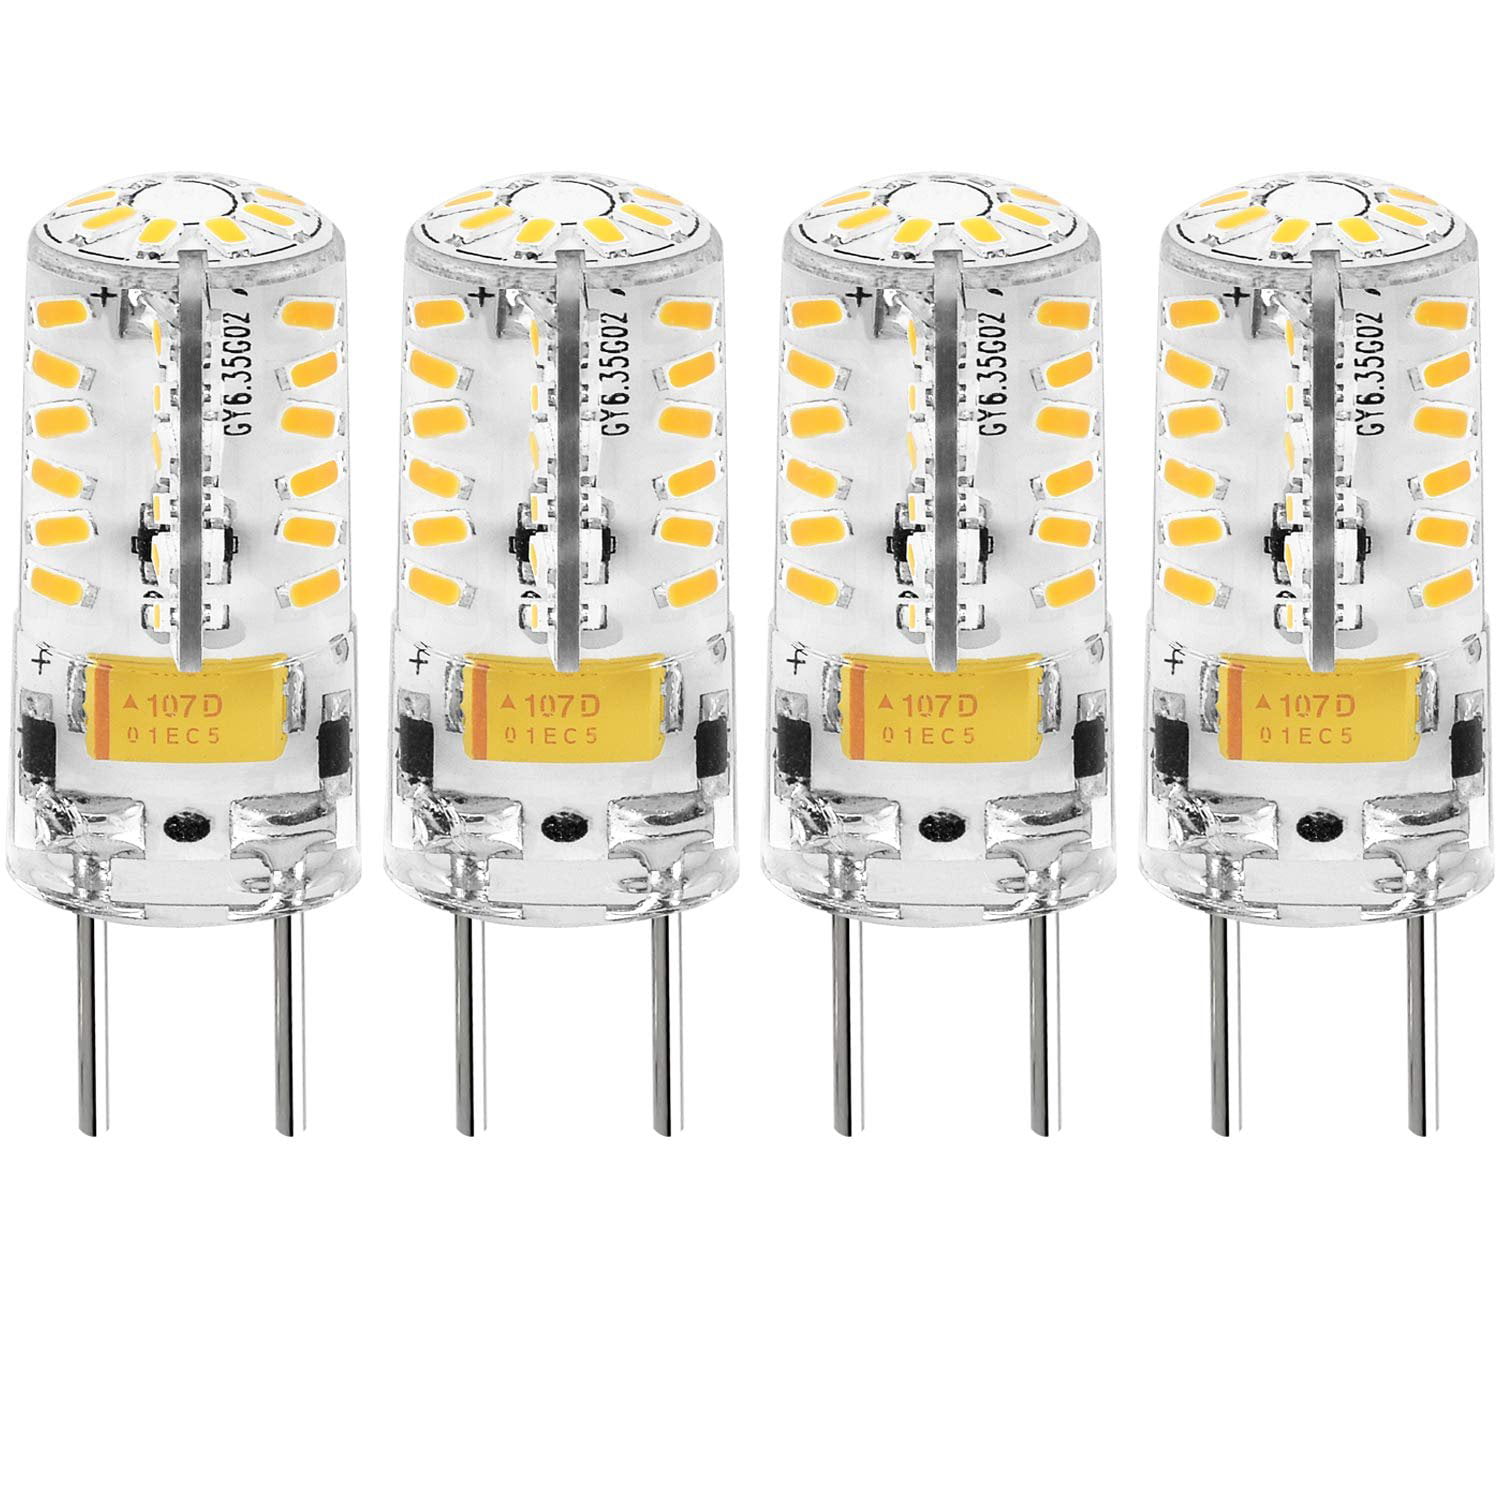 4 x GY6.35 LED Bulb Dimmable 6.5W Halogen Equivalent Warm White Chandelier Light 